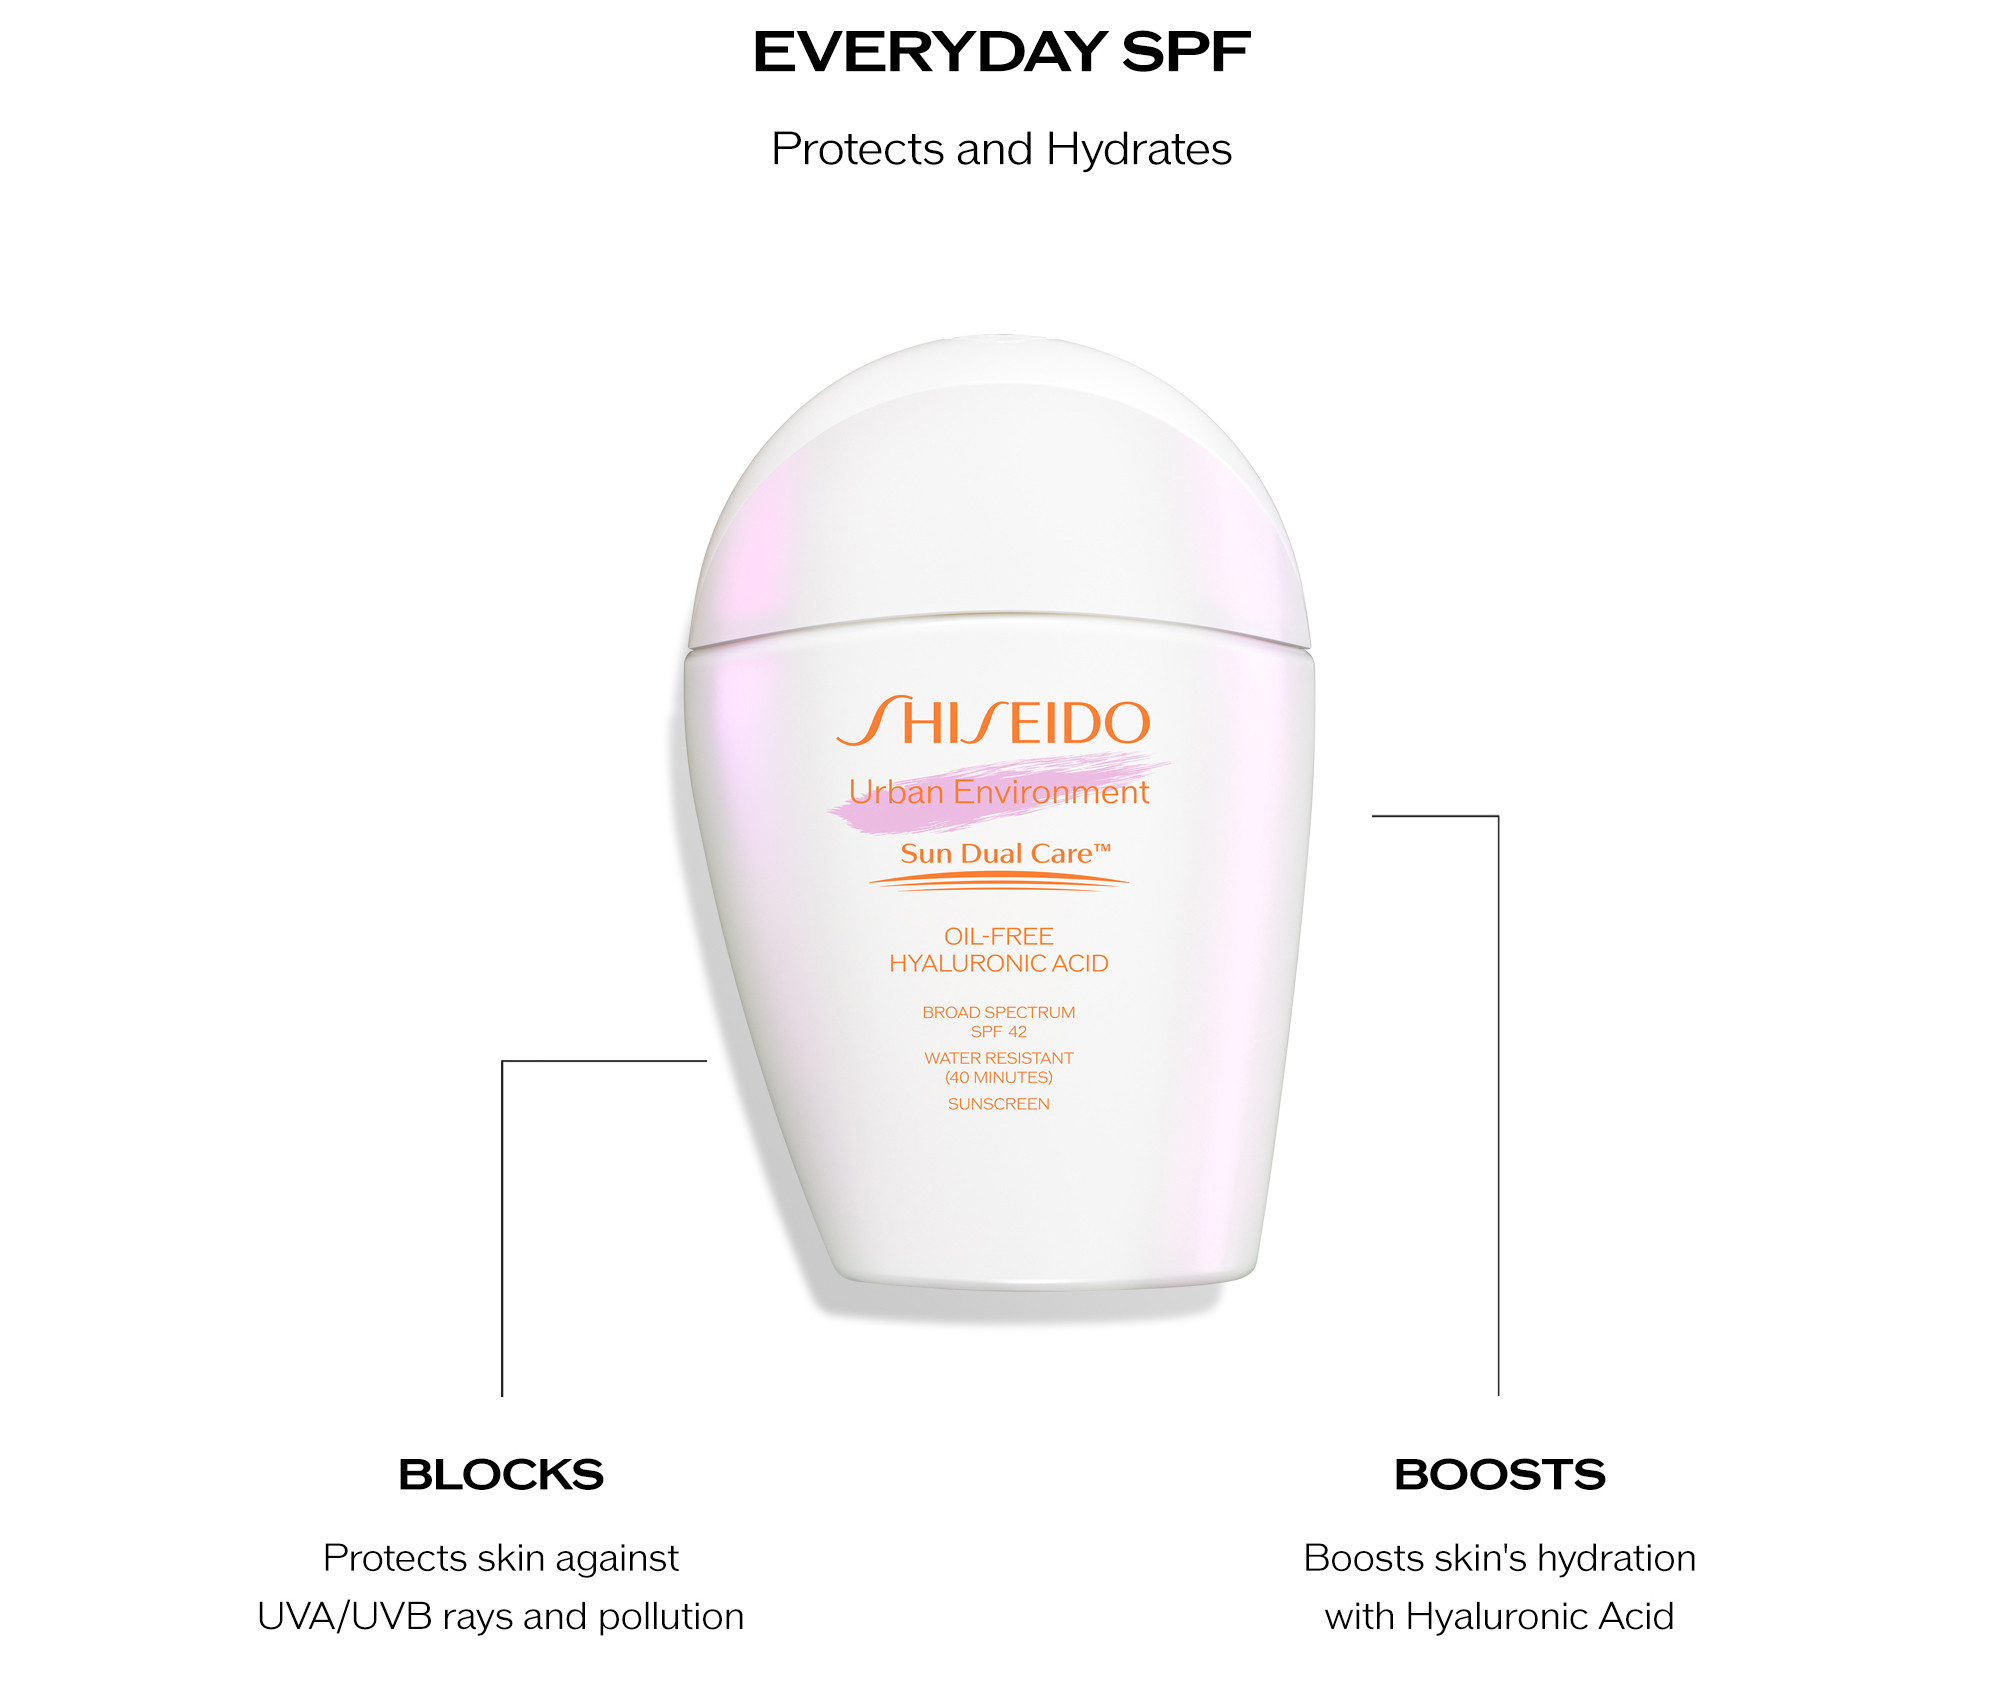 Everyday SPF protects and Hydrates